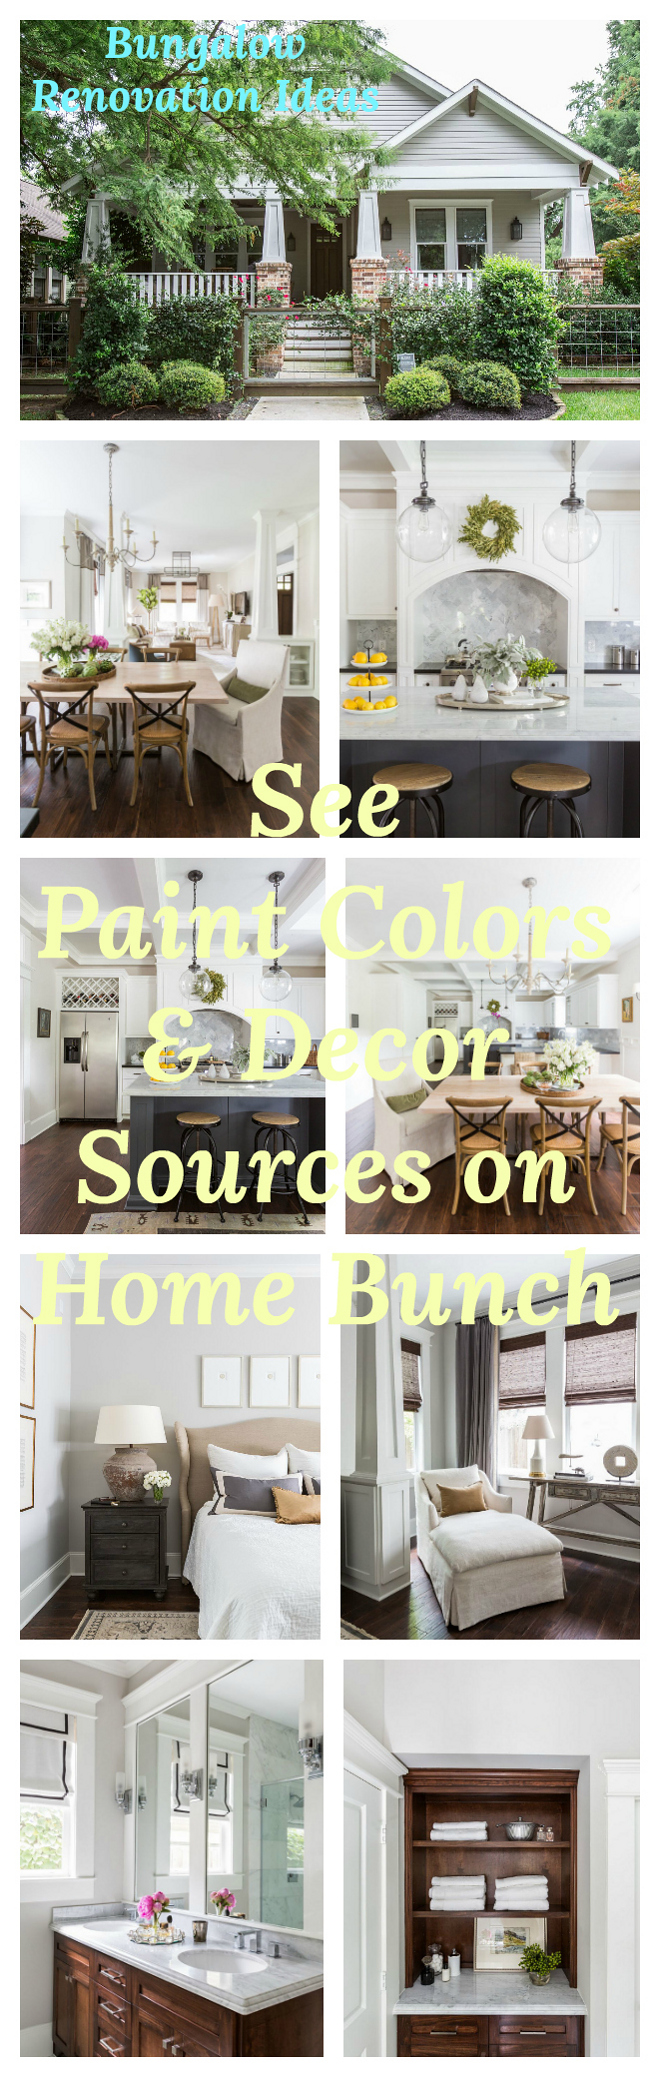 Bungalow Renovation Ideas. See paint colors and decor sources on Home Bunch